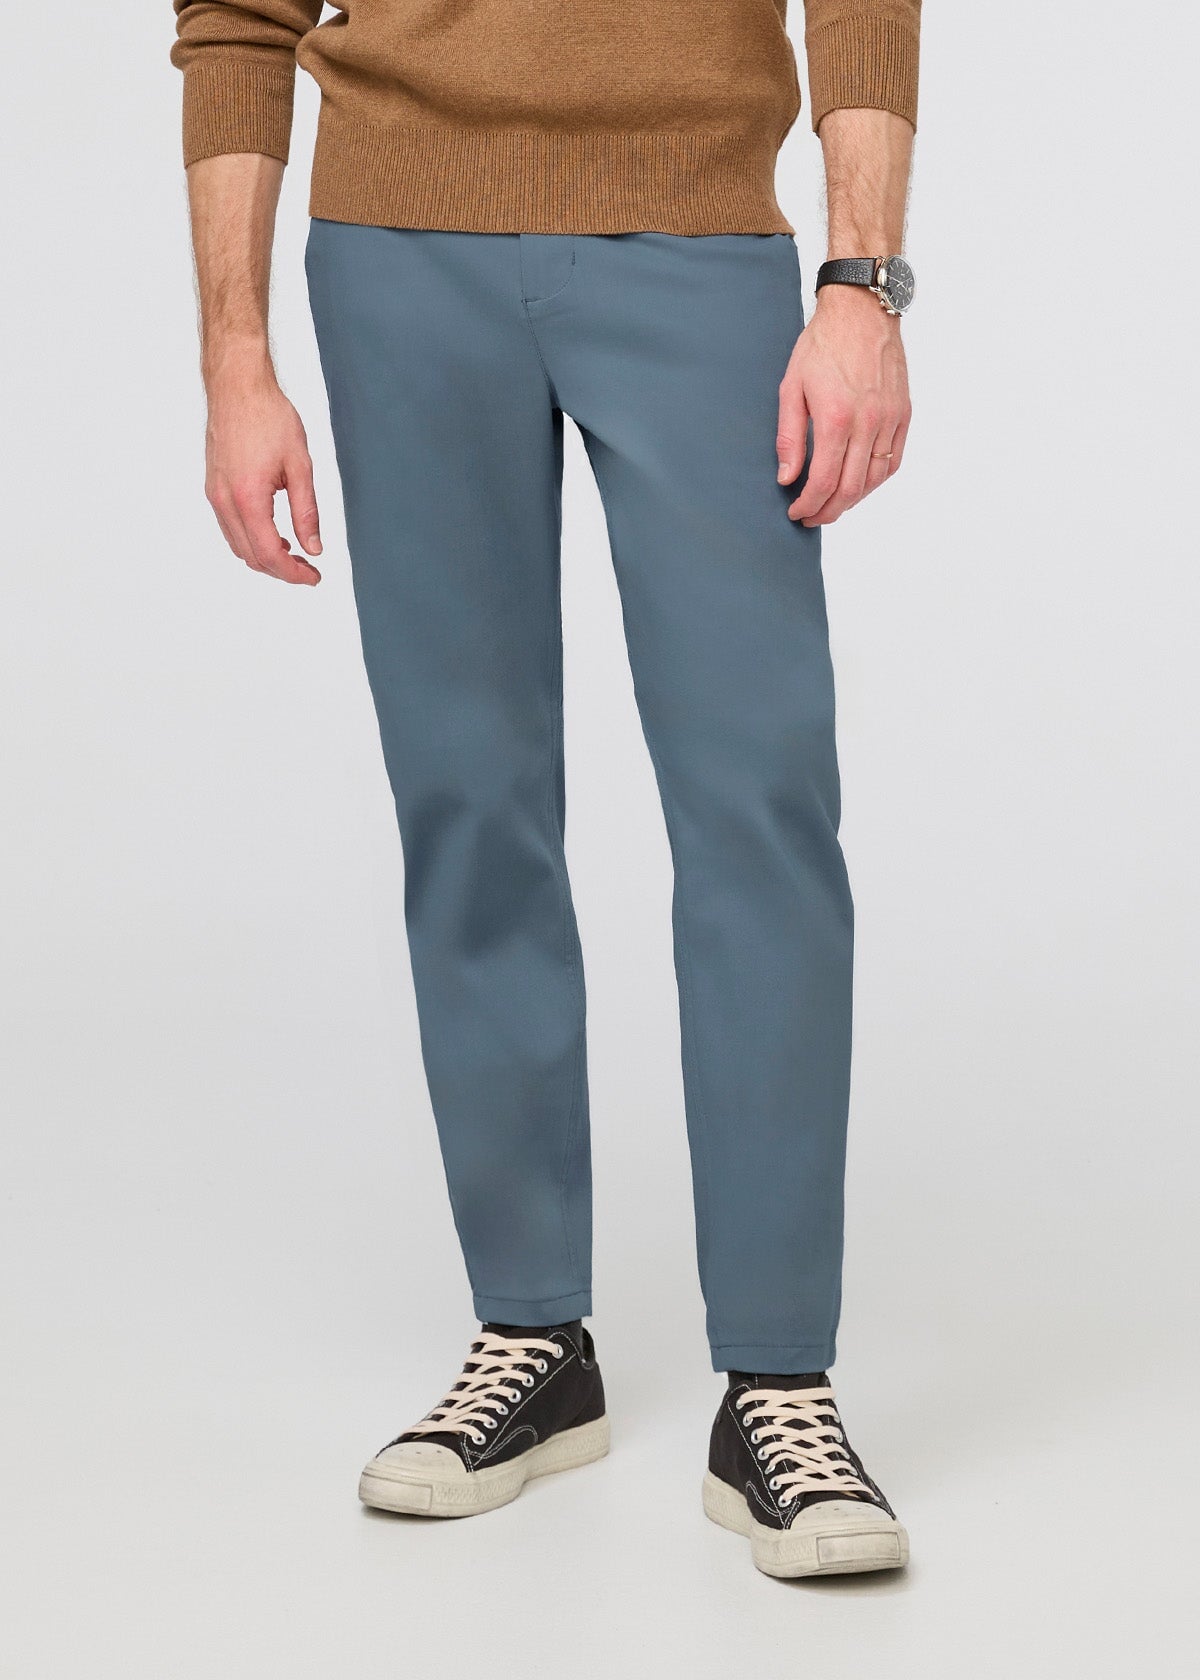 DUER Has the Comfy and Breathable Pants You Need for Summer - The